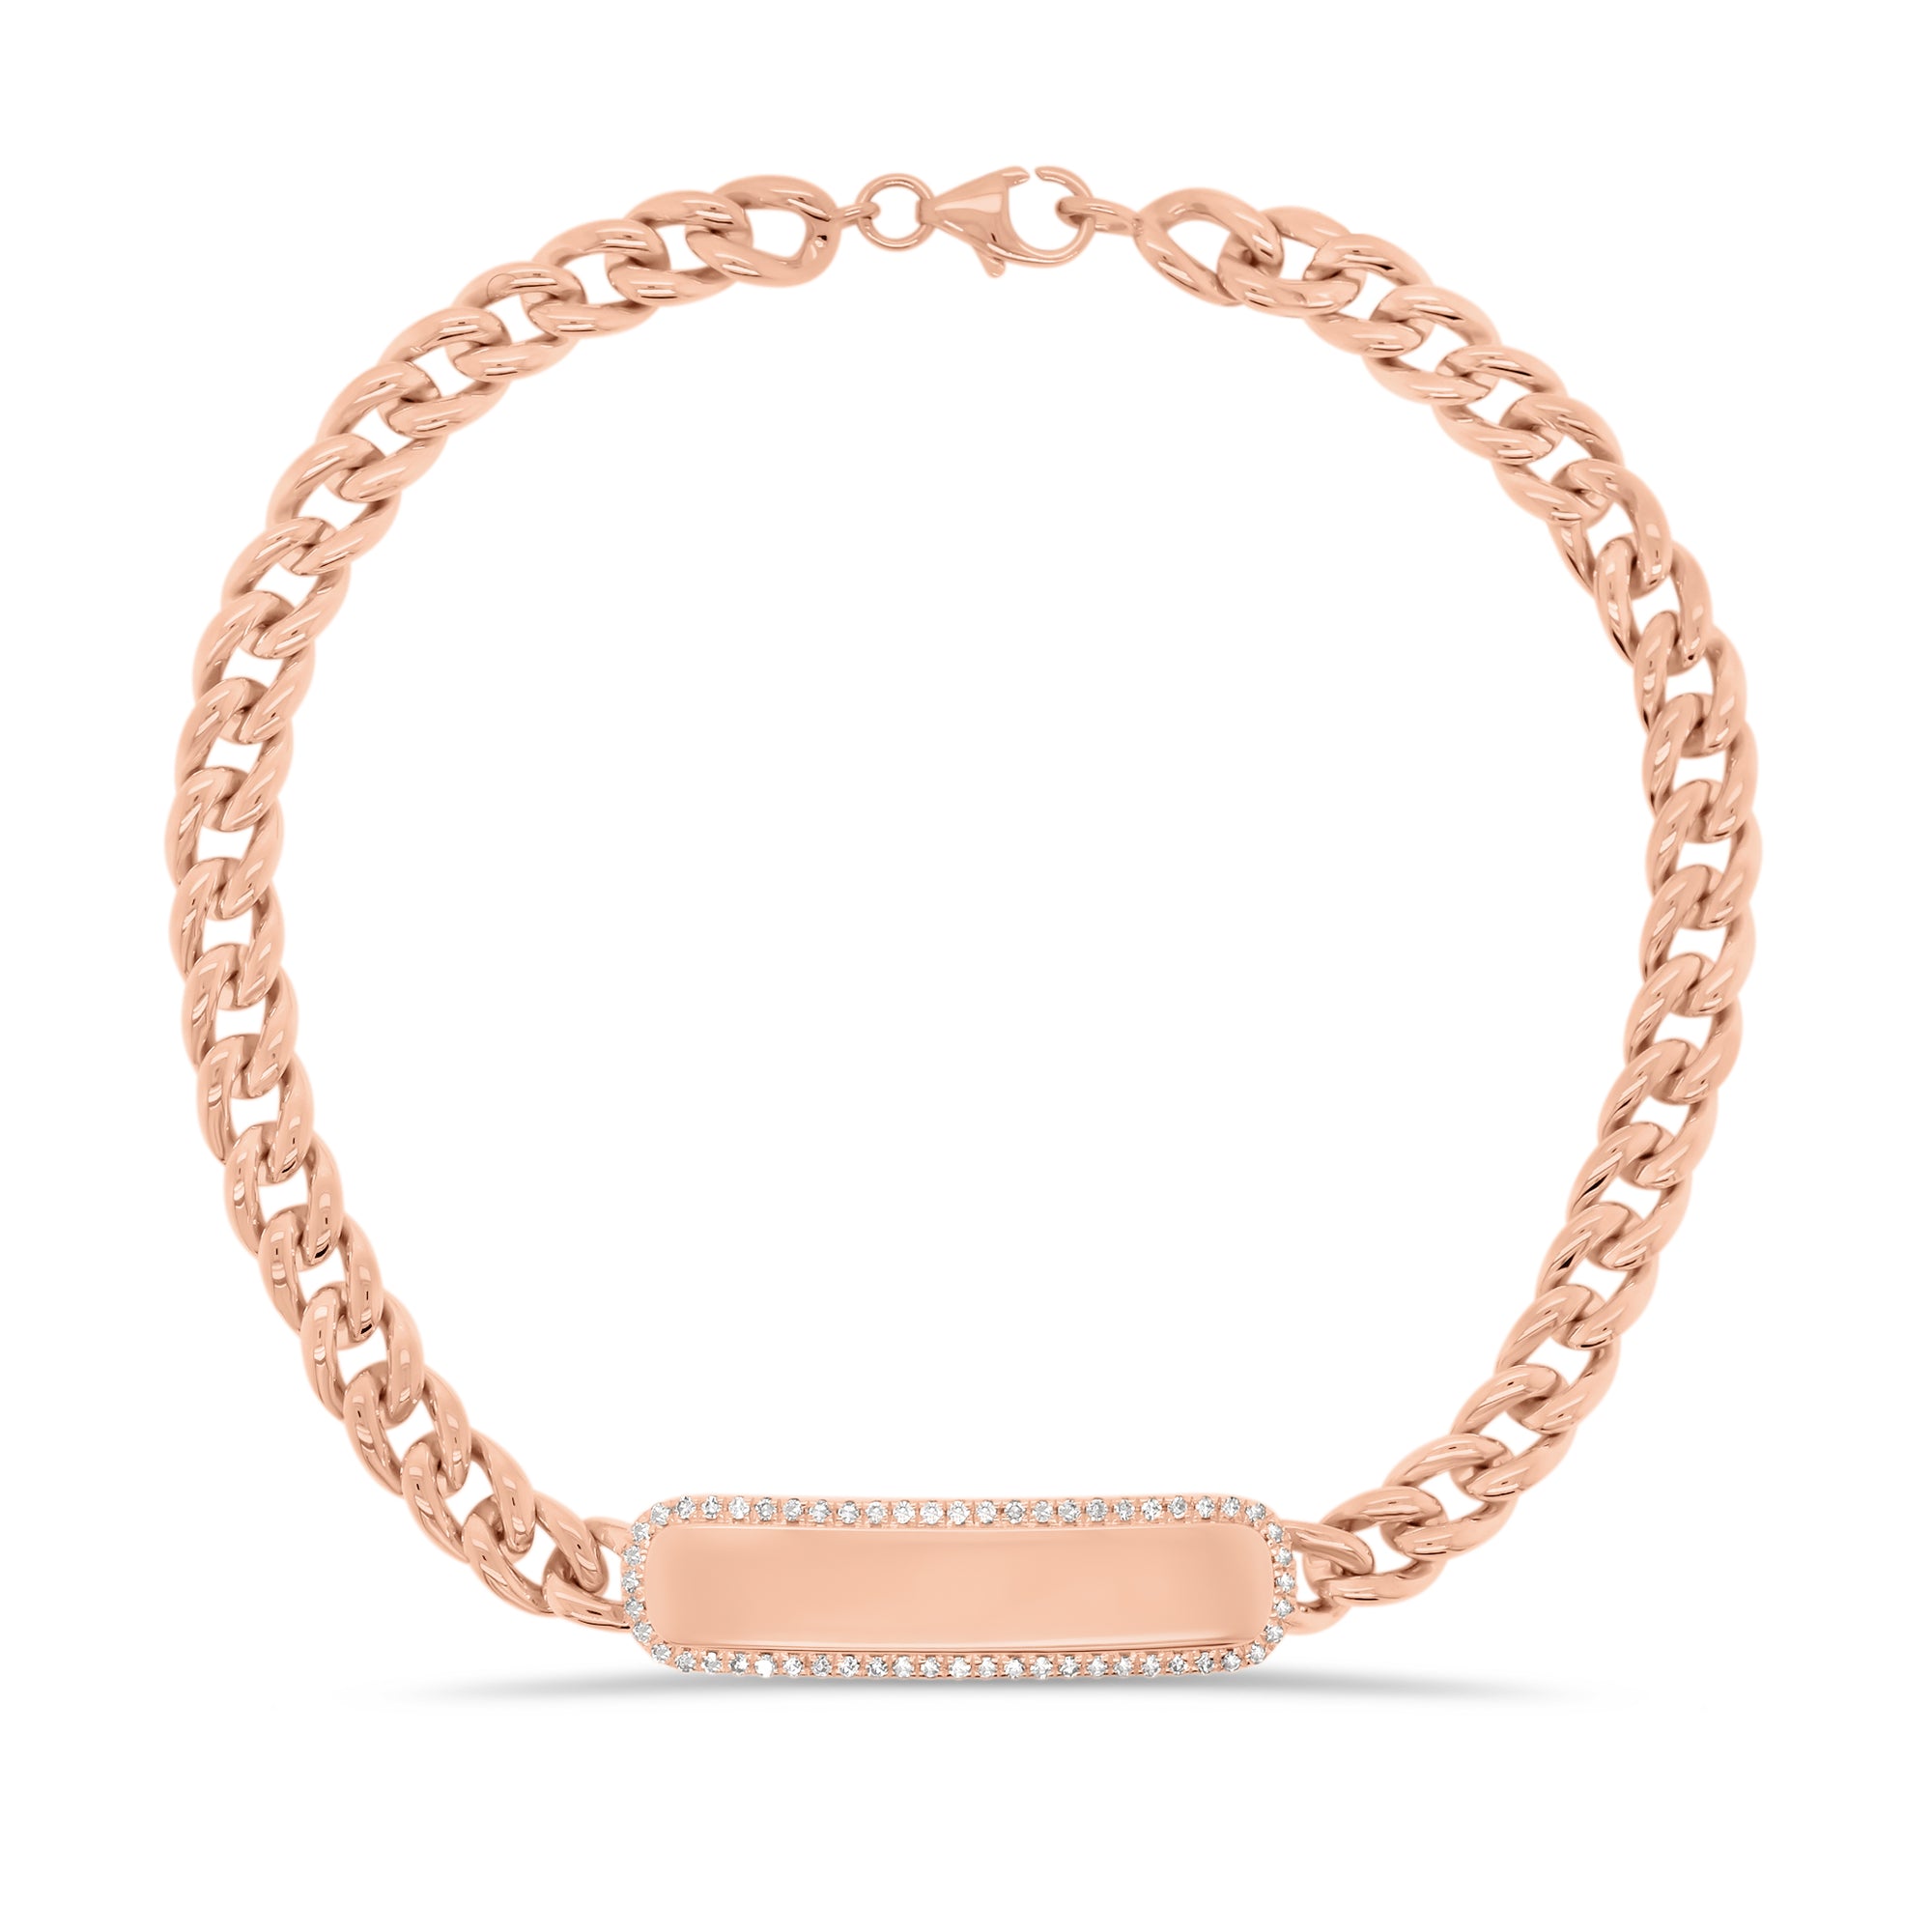 Diamond Framed ID Bracelet with Curb Chain - 14K rose gold weighing 9.85 grams - 56 round diamonds totaling 0.15 carats